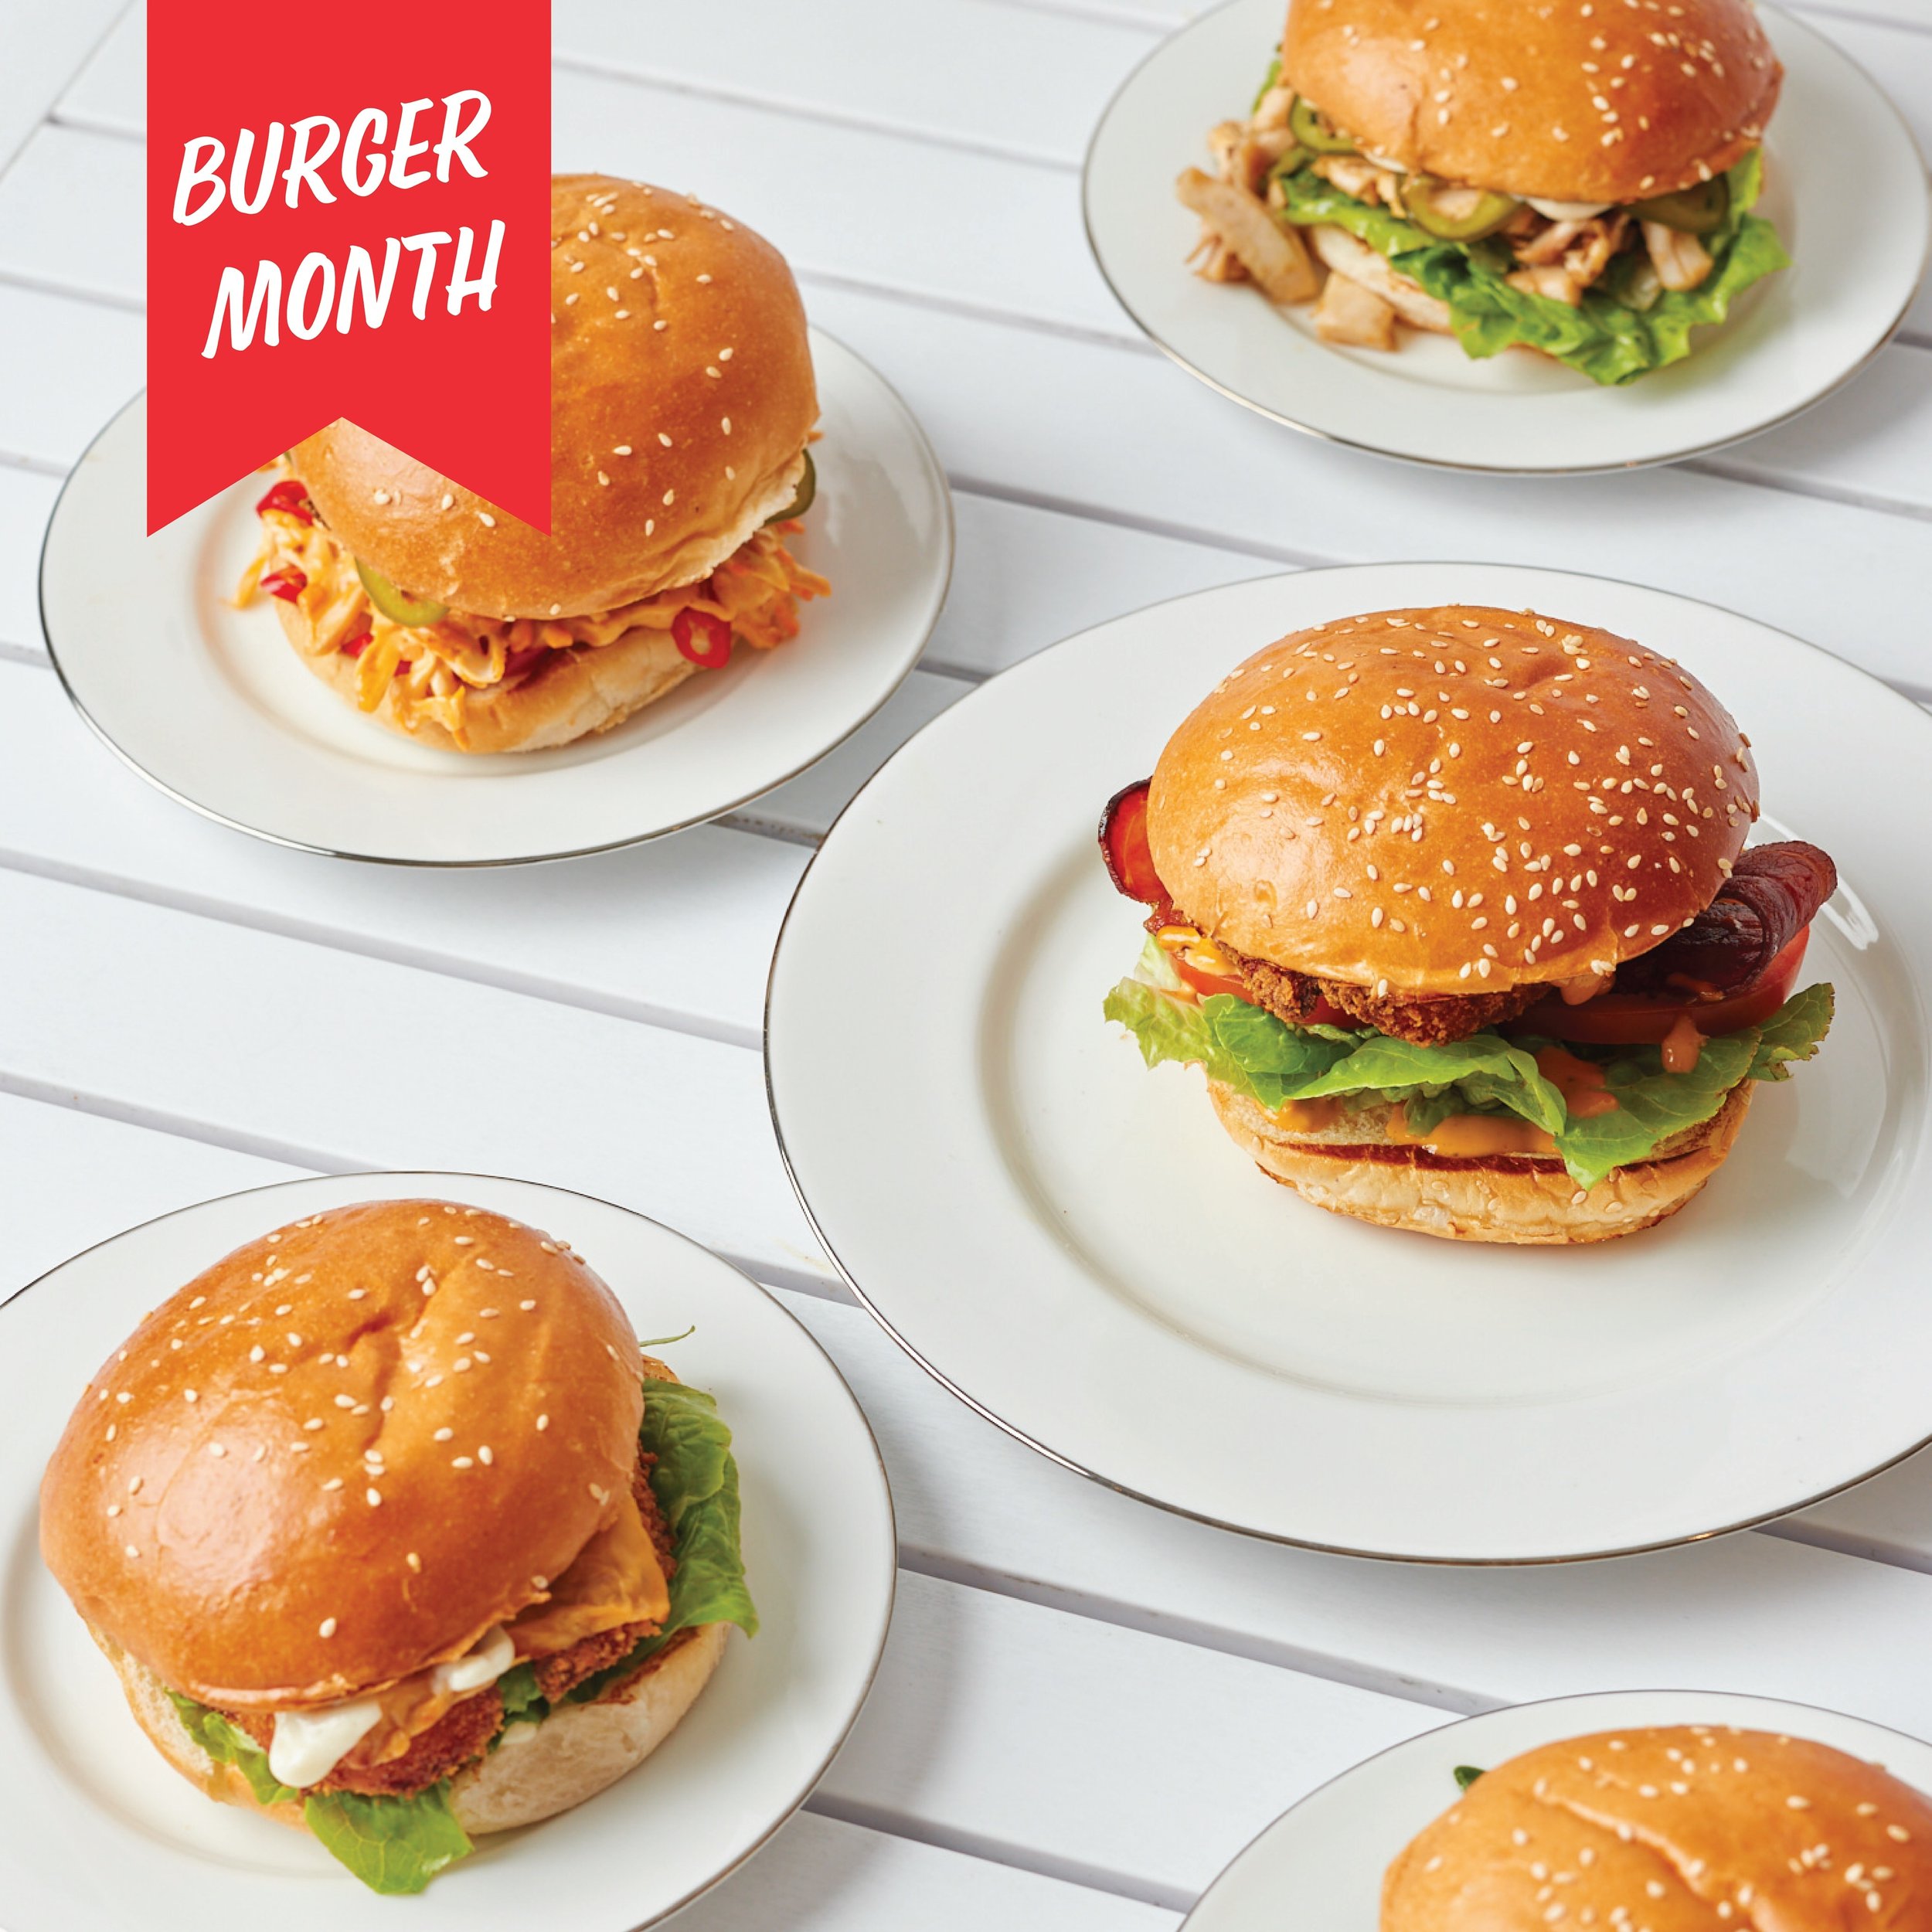 Celebrating International Burger Month with our mouthwatering chicken burgers!

Calling all burger devotees come sink your teeth into our juicy chicken burgers stacked high with all your favorite fixings. 

Whether you're craving classic flavors or s